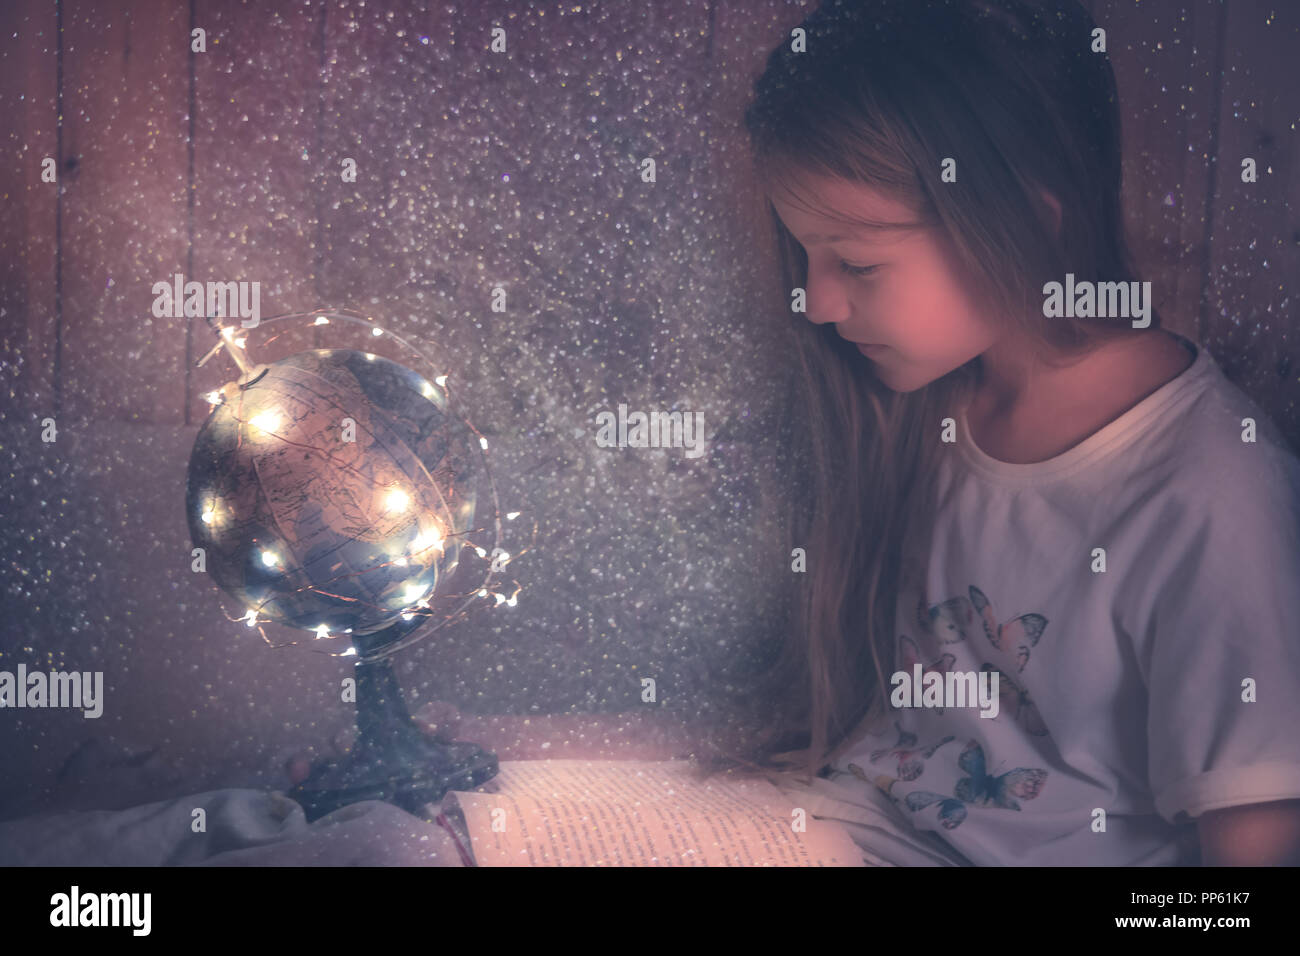 Admiring kid  girl reading  book in bed dreaming about space and universe concept astronomy curiosity knowledge education development Stock Photo